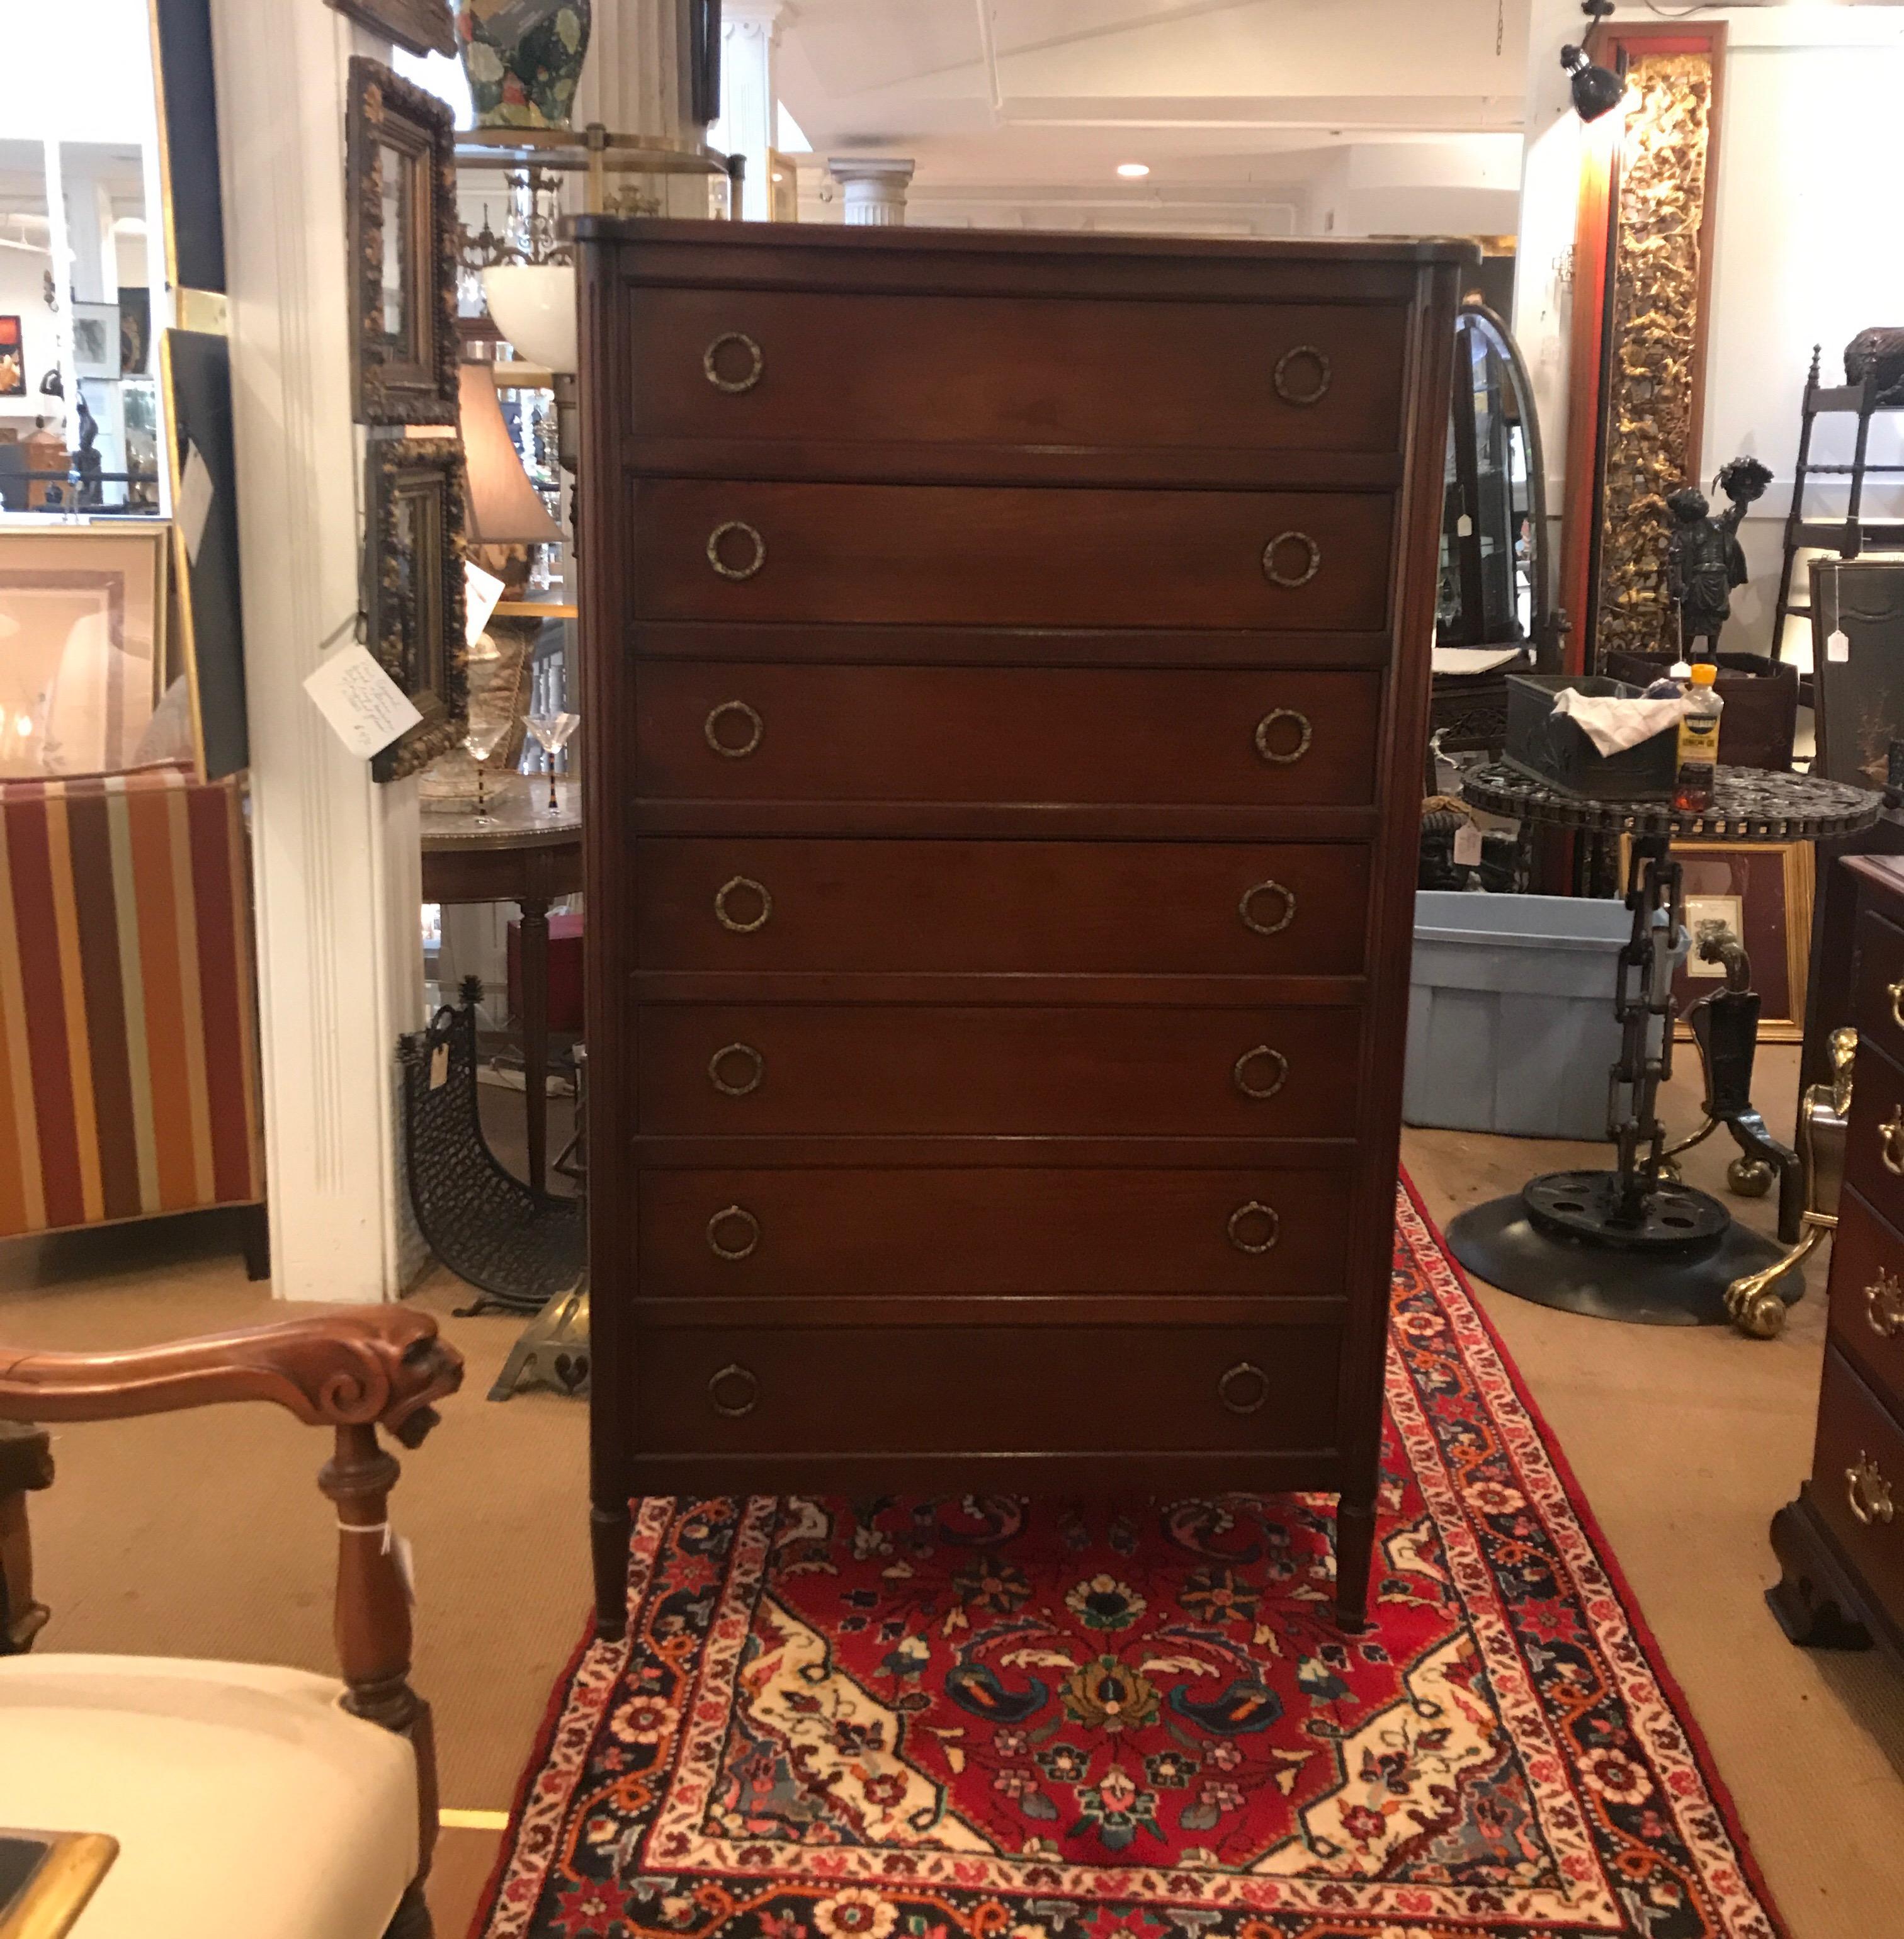 High quality custom made tall chest by Cassard Chateau of NYC. The chest with 7 drawers one being a fall front drawer. The original hardware is a finely cast bronze.